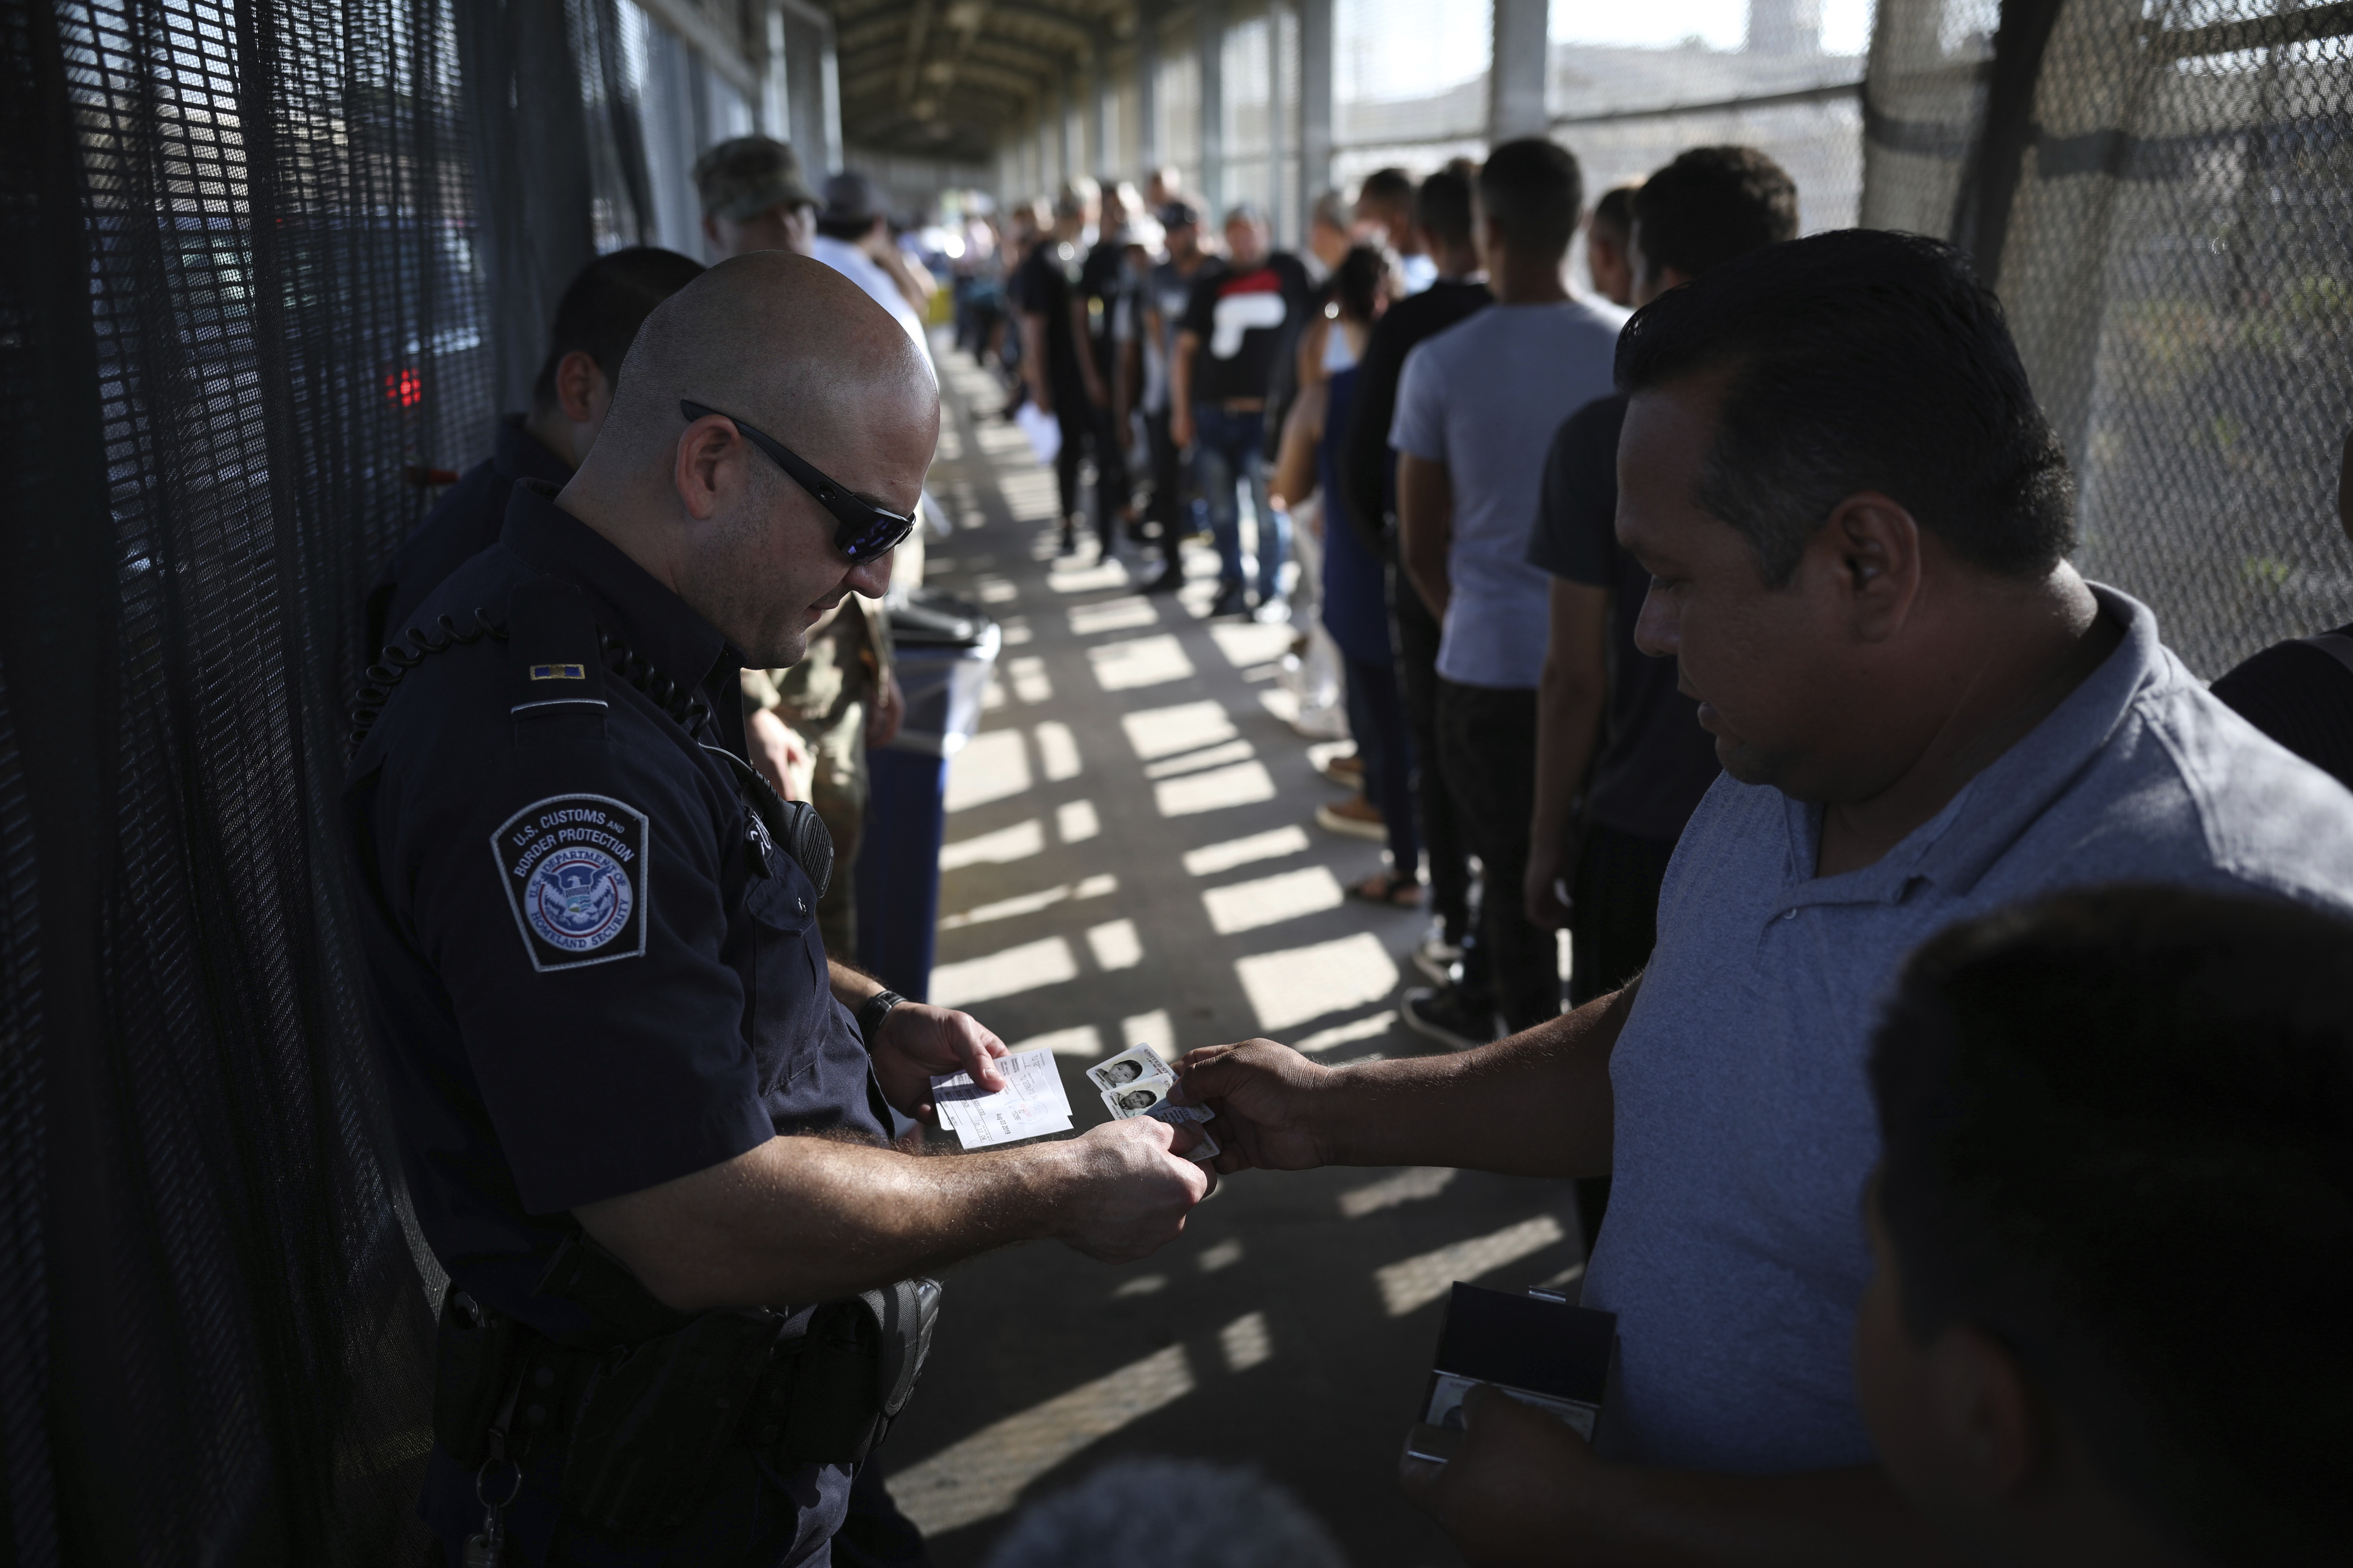 CORRECTS DATE - U.S Customs officer verifies the Visas of a man and his family at the foot of the Puerta Mexico bridge that crosses into Brownsville, Texas, in Matamoros, Mexico, Friday, Aug. 2, 2019. (AP Photo/Emilio Espejel)